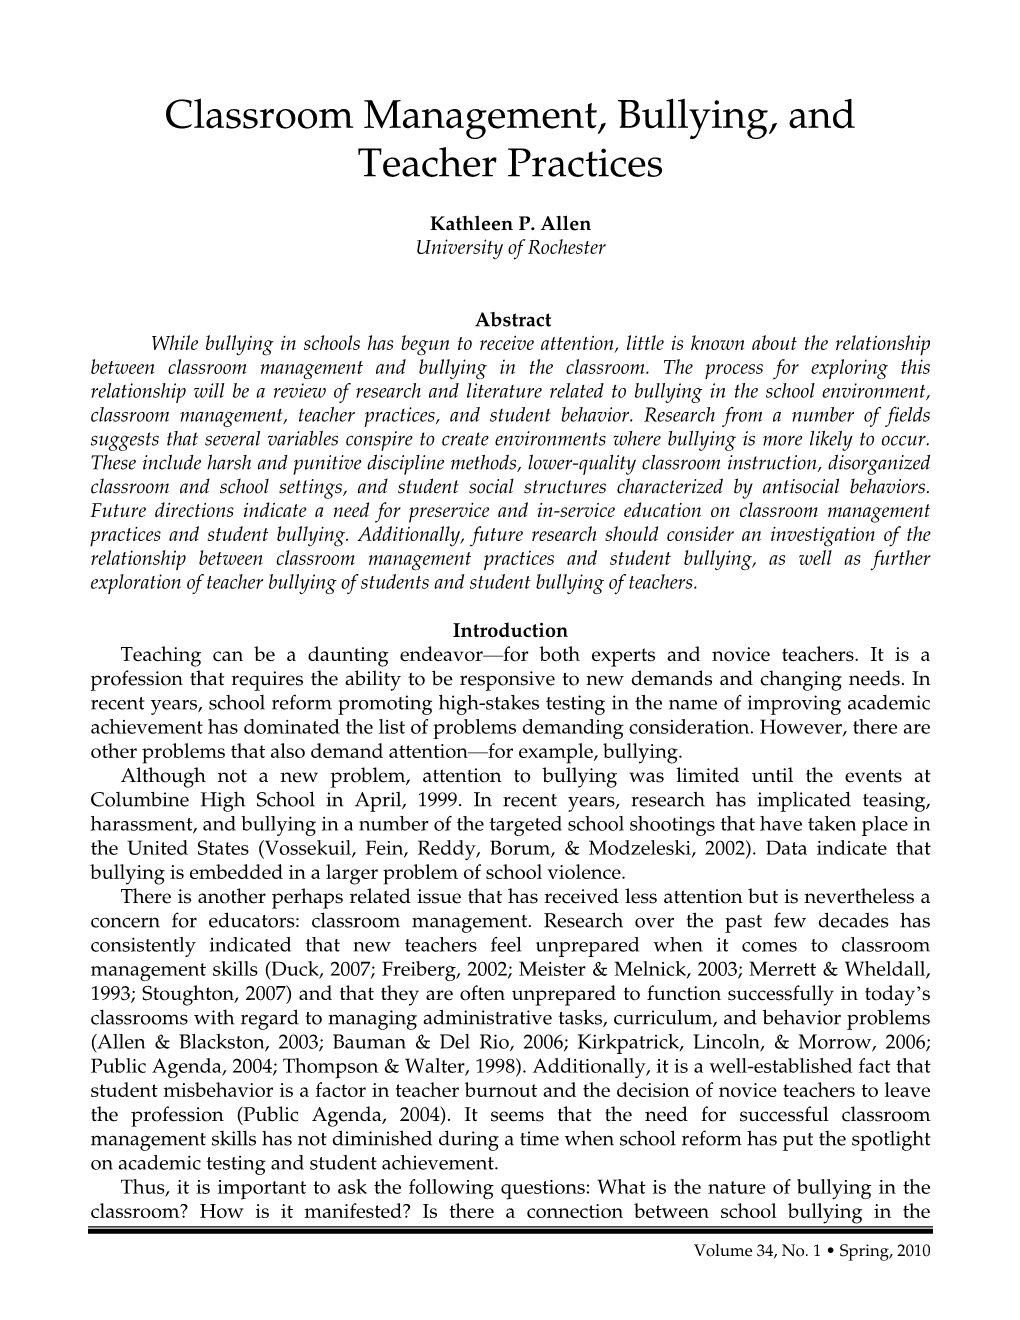 Classroom Management, Bullying, and Teacher Practices